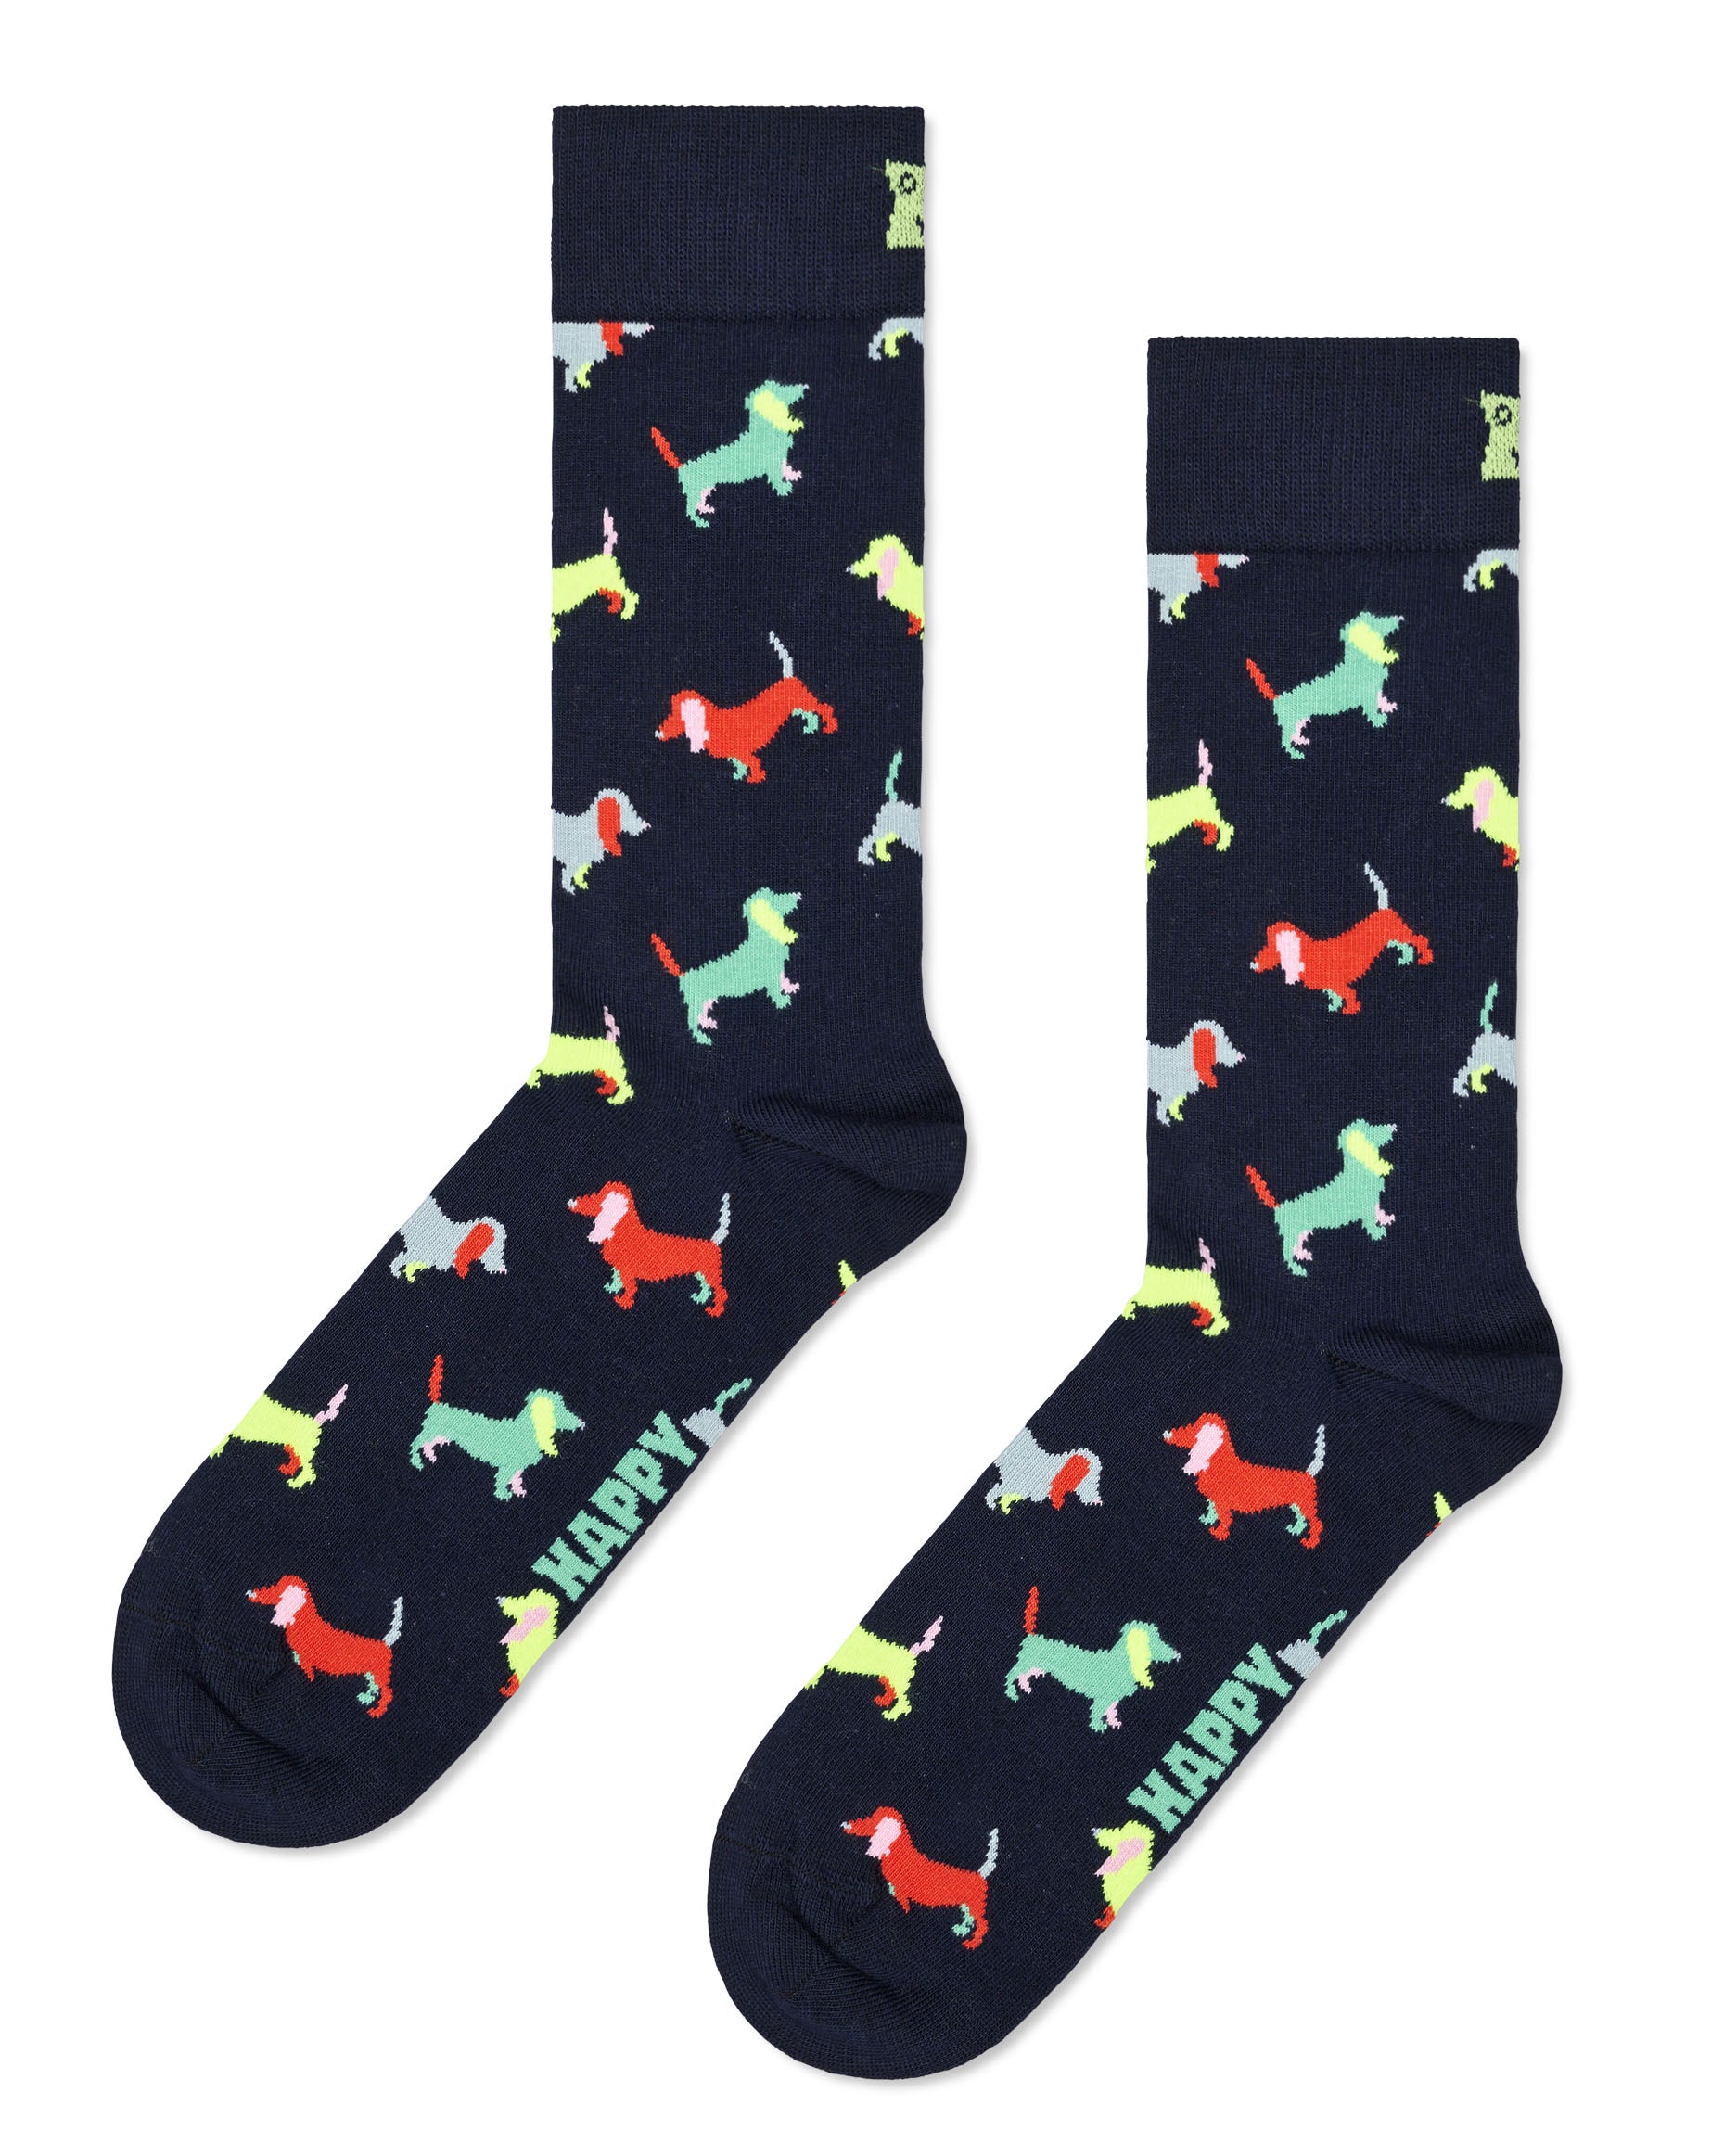 Happy Socks PUL01-6500 Puppy Love Sock - Dark navy cotton crew length ankle socks with a multicoloured dachshund type pattern.